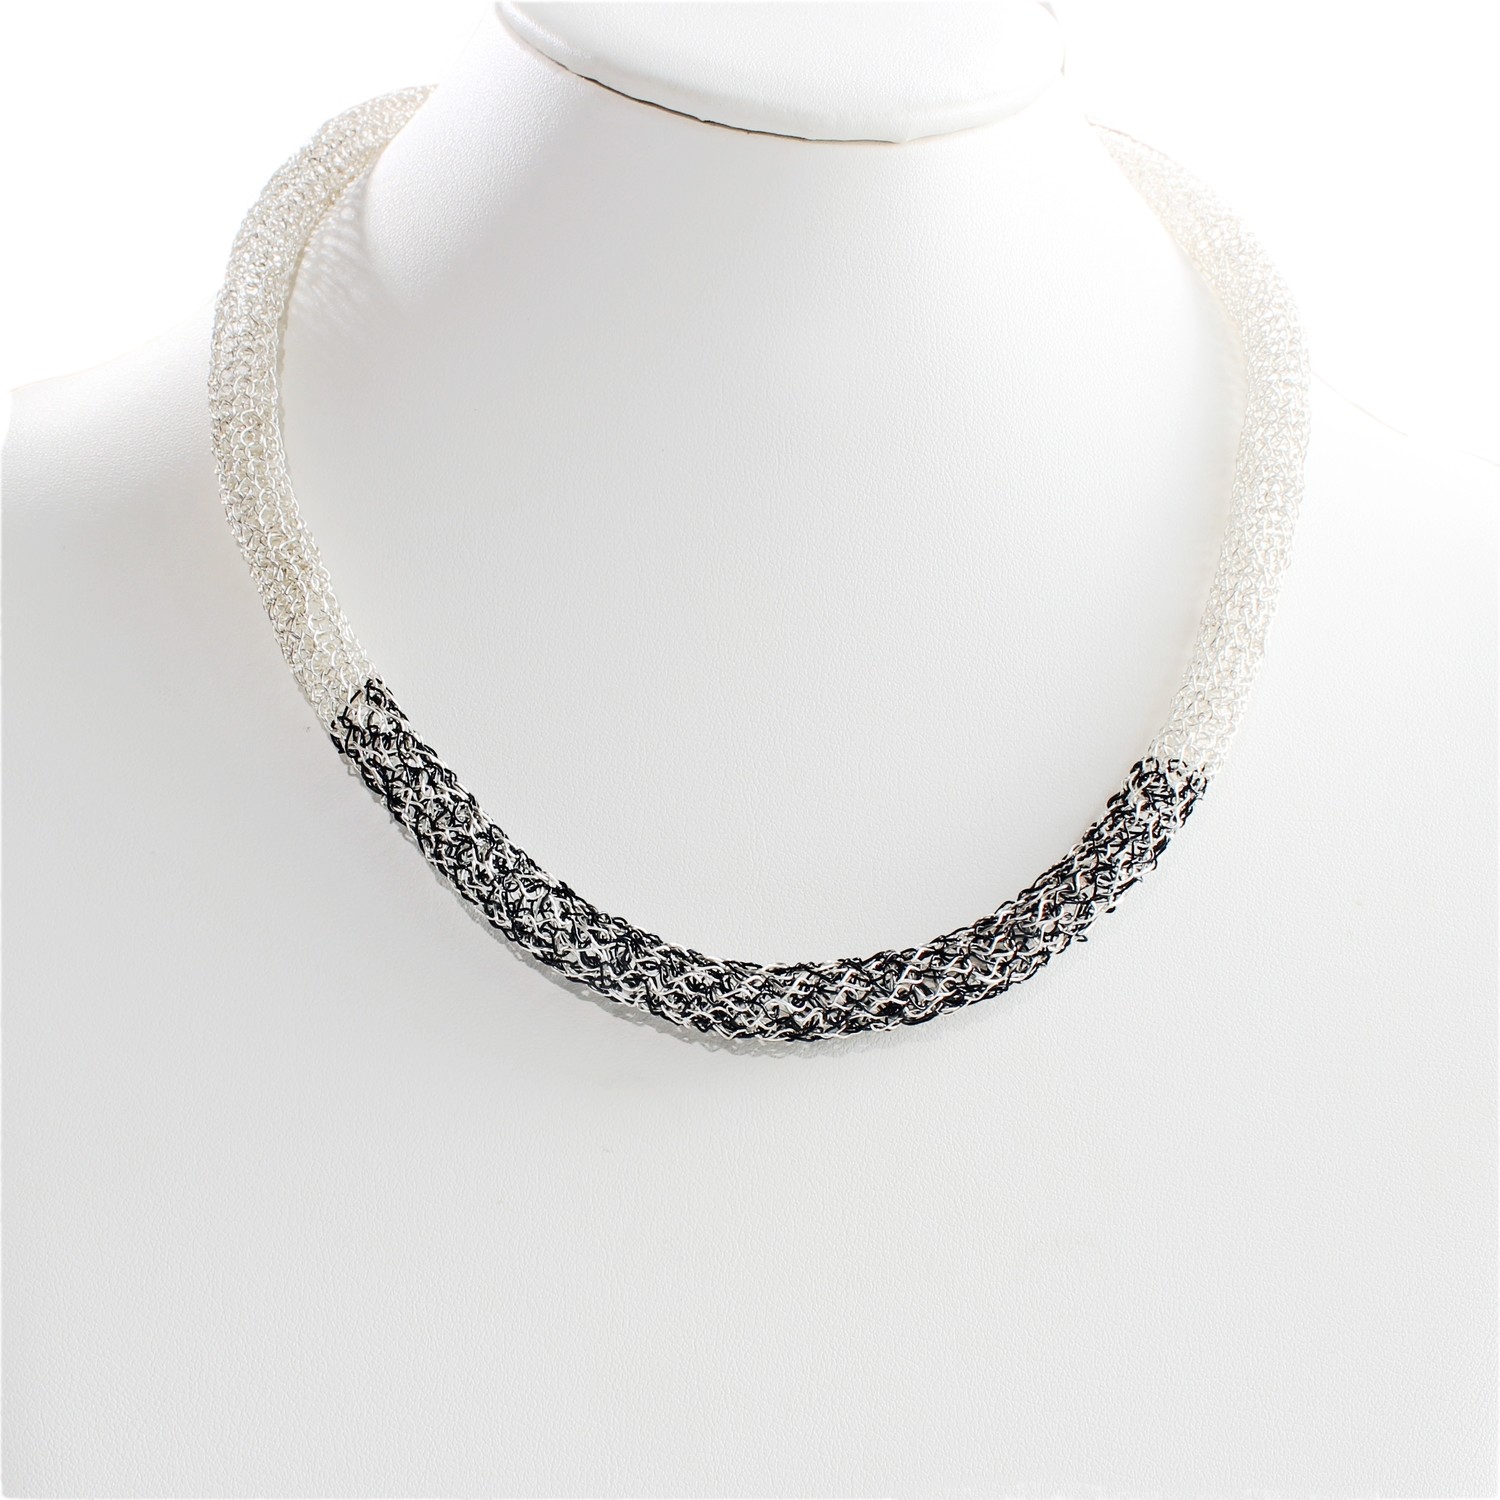 Silver and Black Crochet Wire Necklace